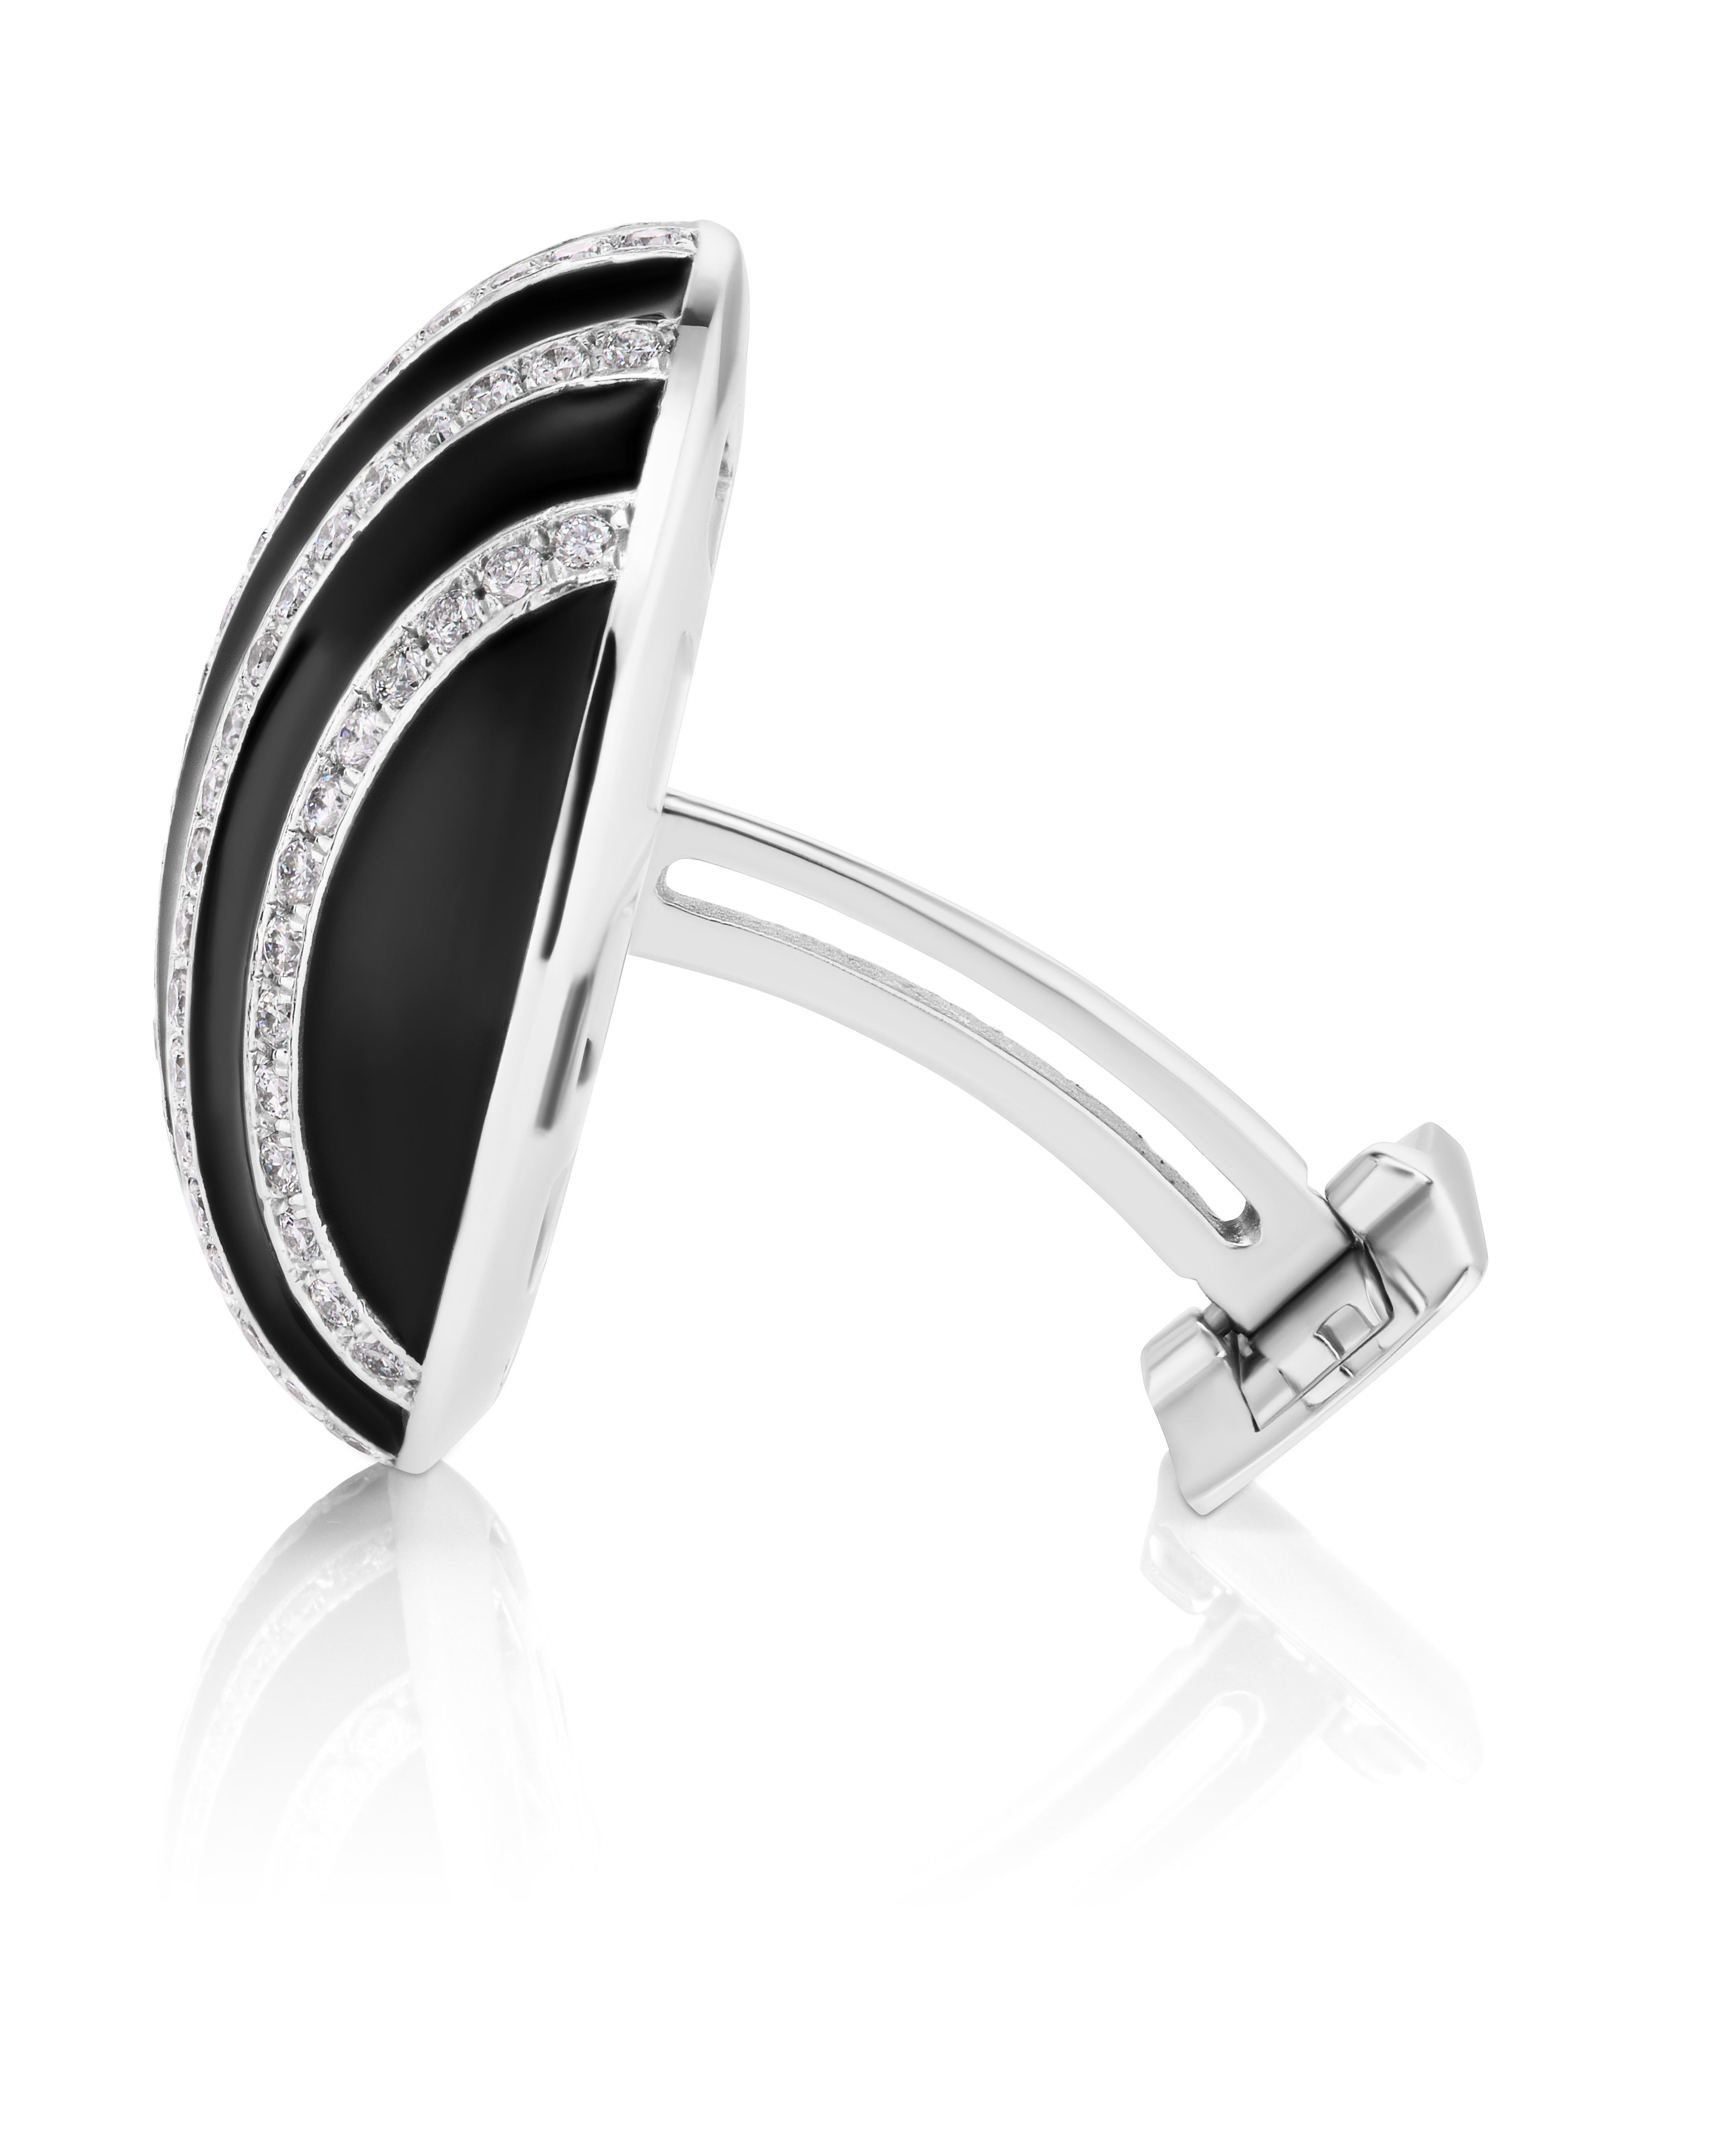 Round Zebra Cufflink with lines of Diamonds set with 178 Round Diamonds weighing 1.78 Carats.
Set in 18 Karat White Gold and Natural Black Enamel.